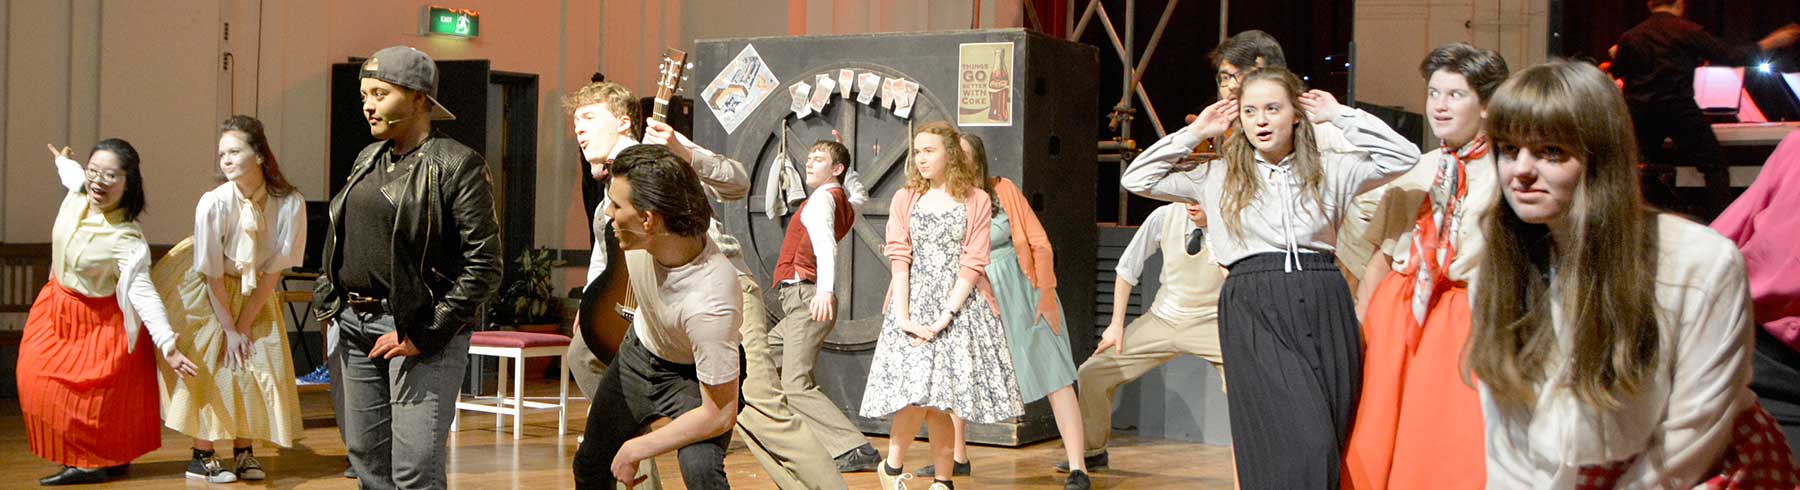 A large group of students rehearsing a play on a stage 